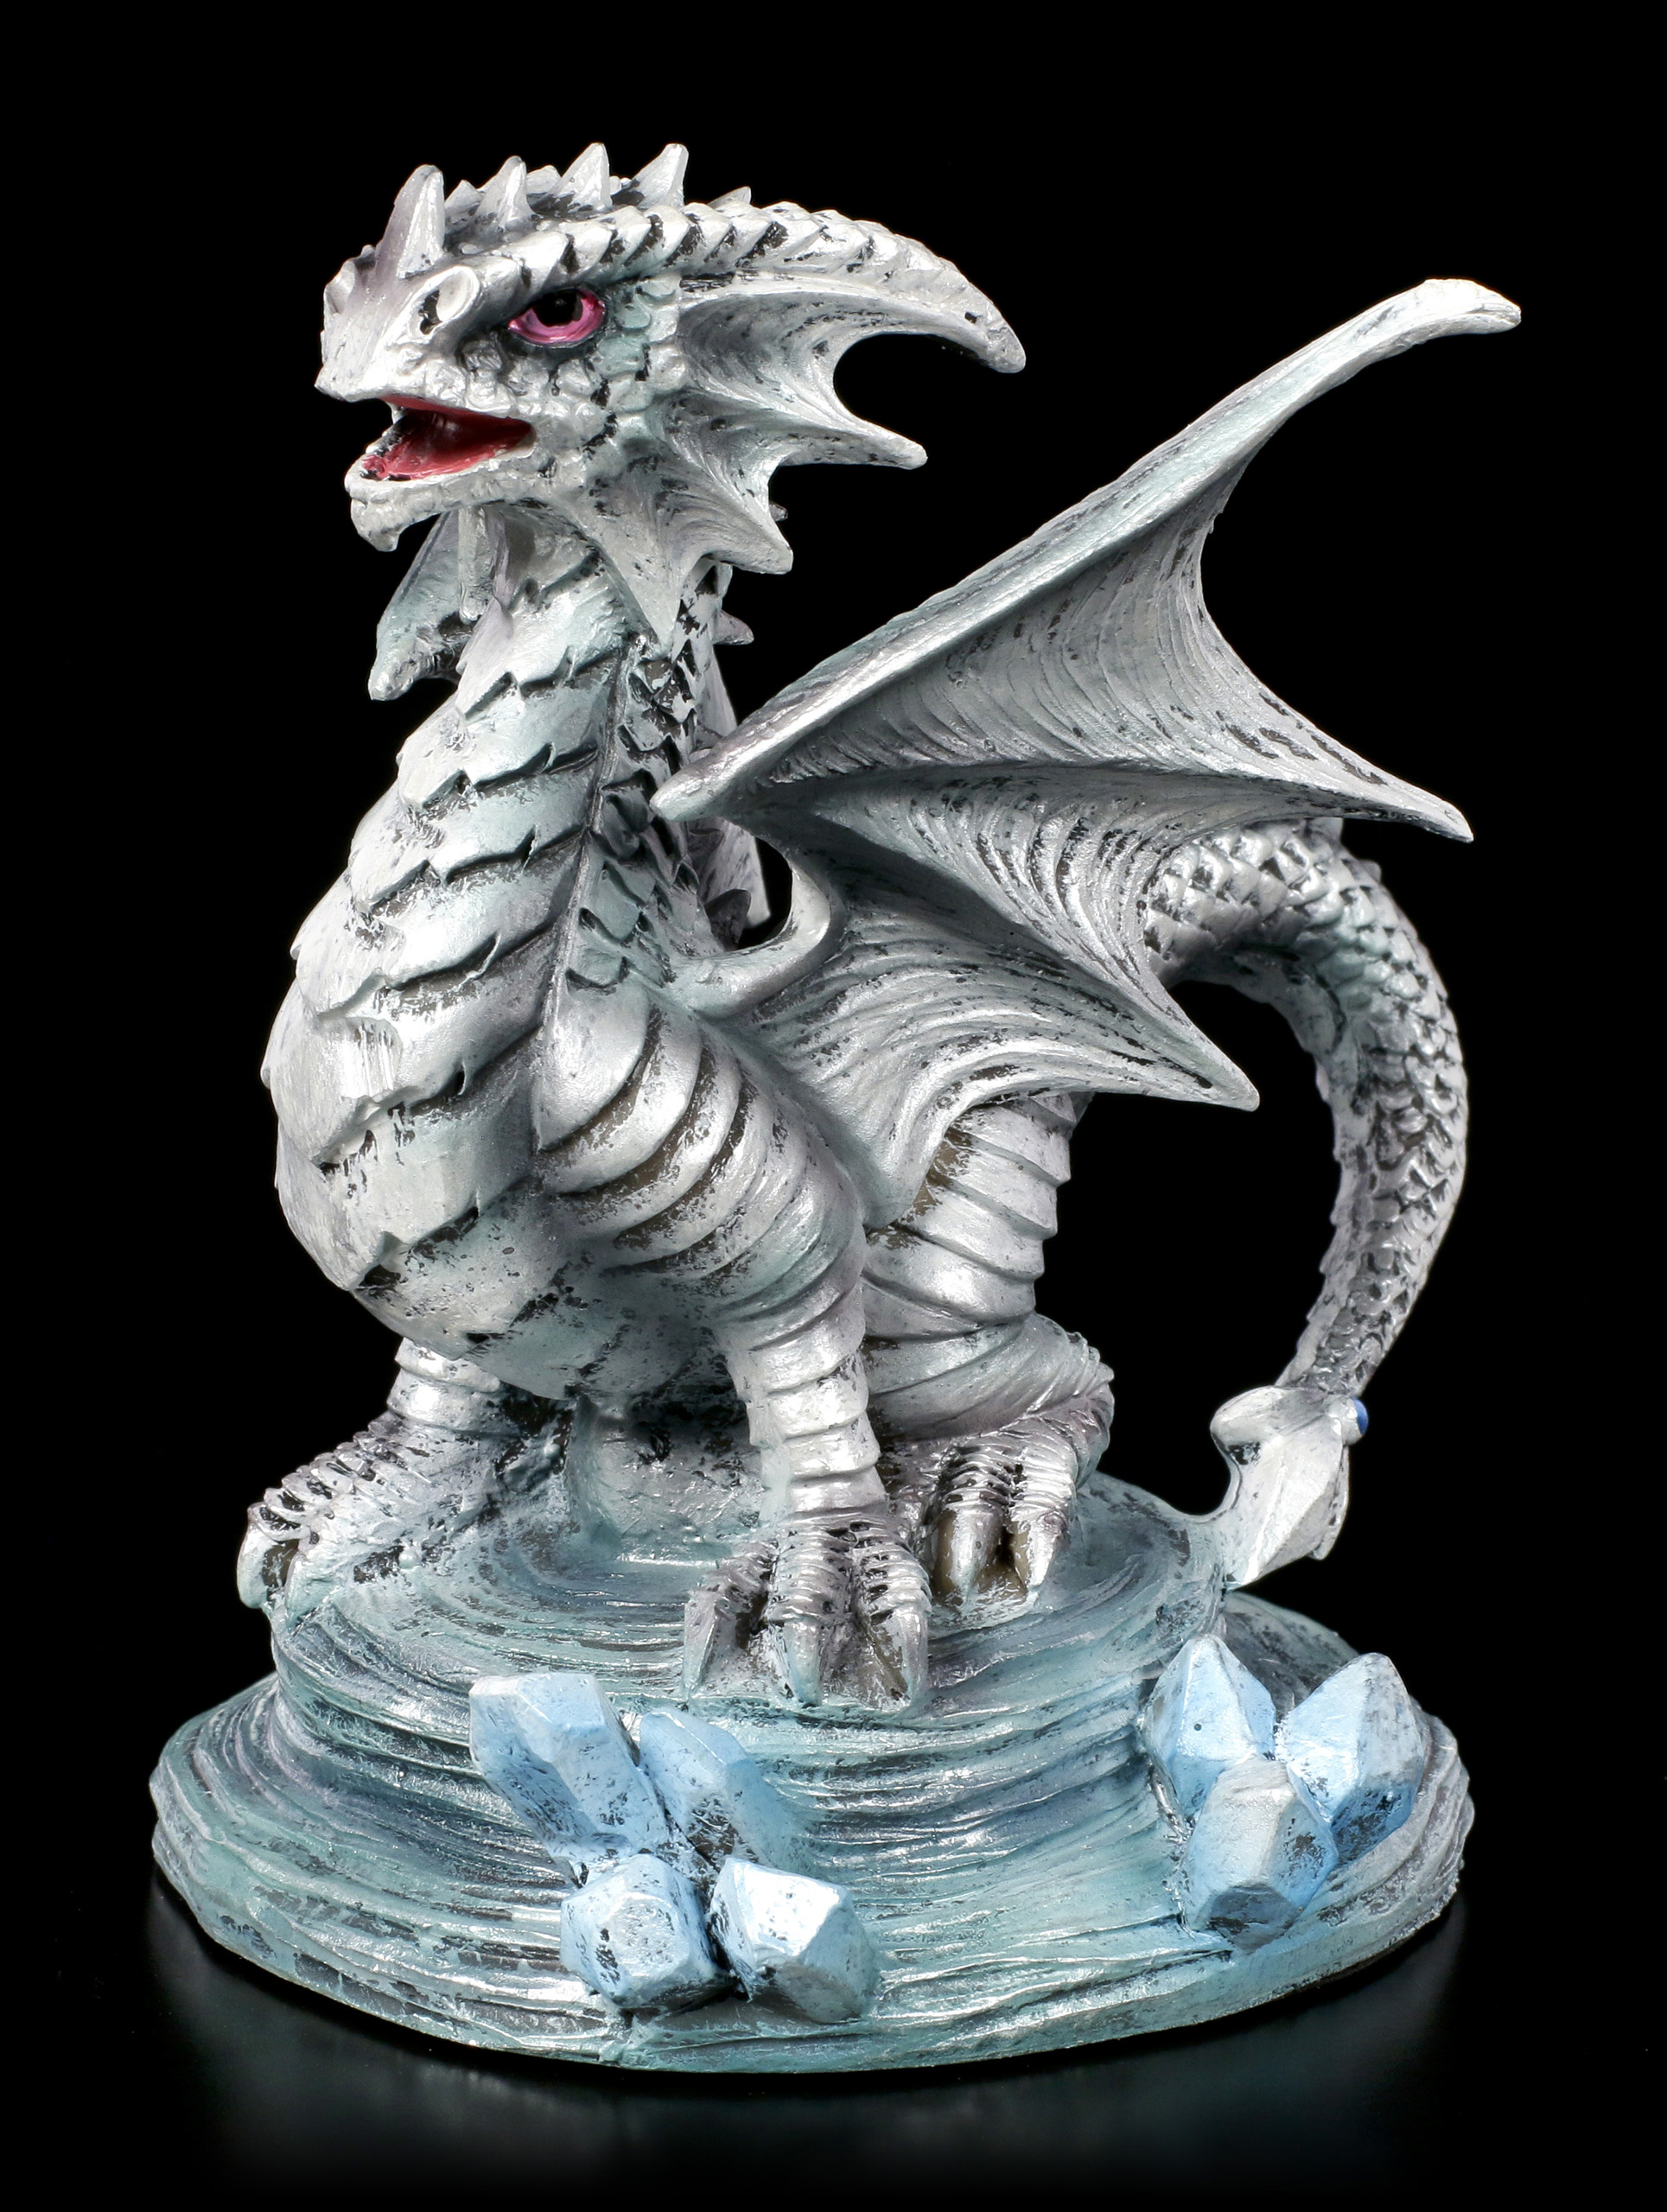 Blue Mother & Baby Dragon Figurine Statue Ornament Sculpture Gift New & Boxed 